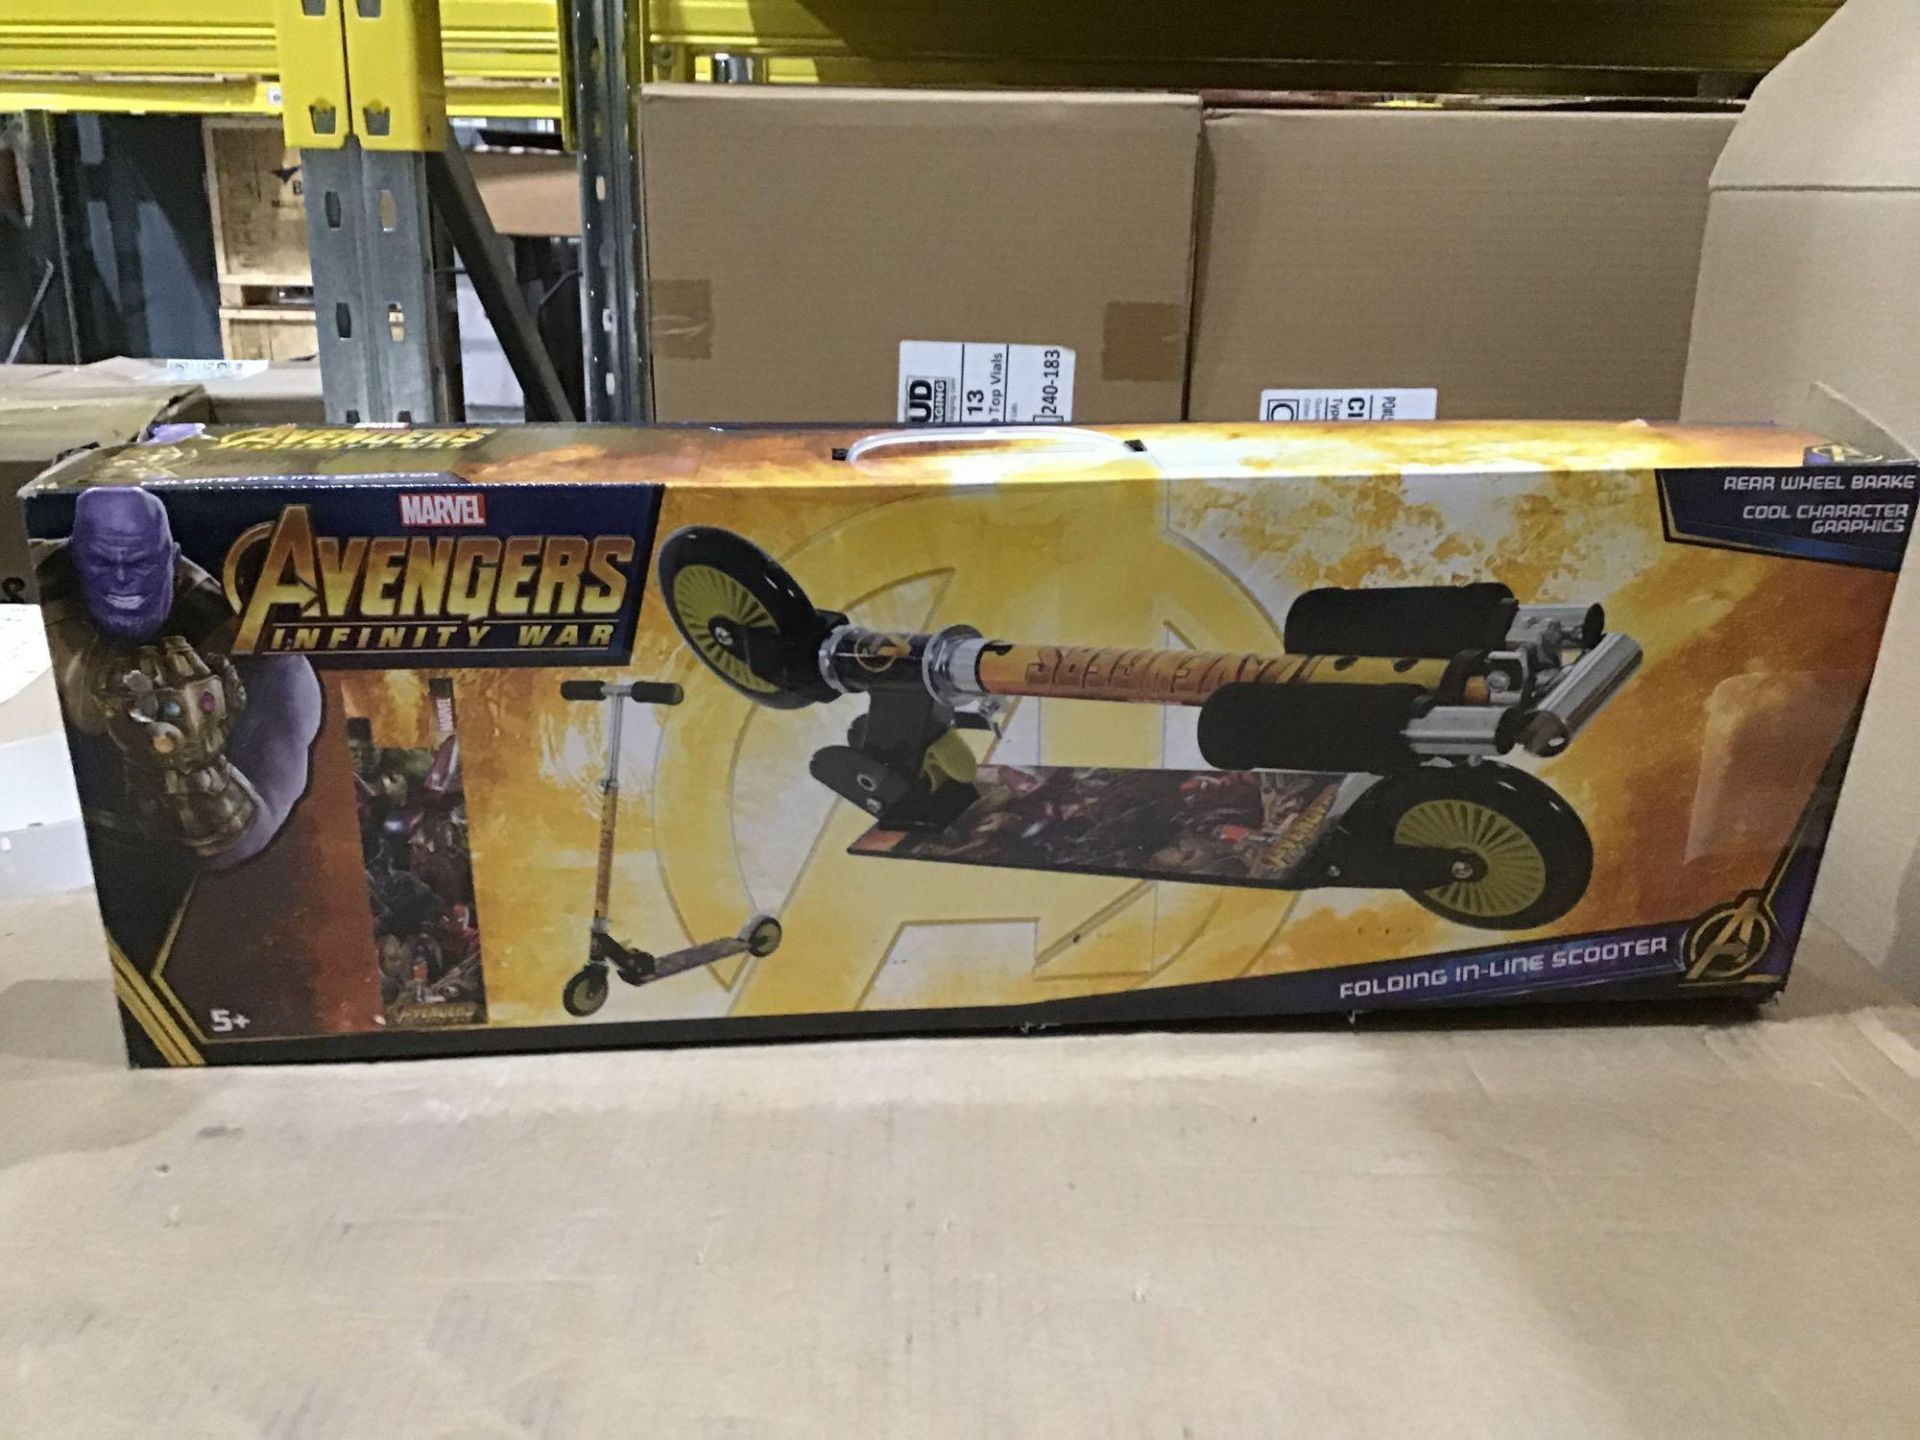 Marvel Aveners Infinity War Folding In-Line Scooter £21.28 RRP - Image 4 of 5